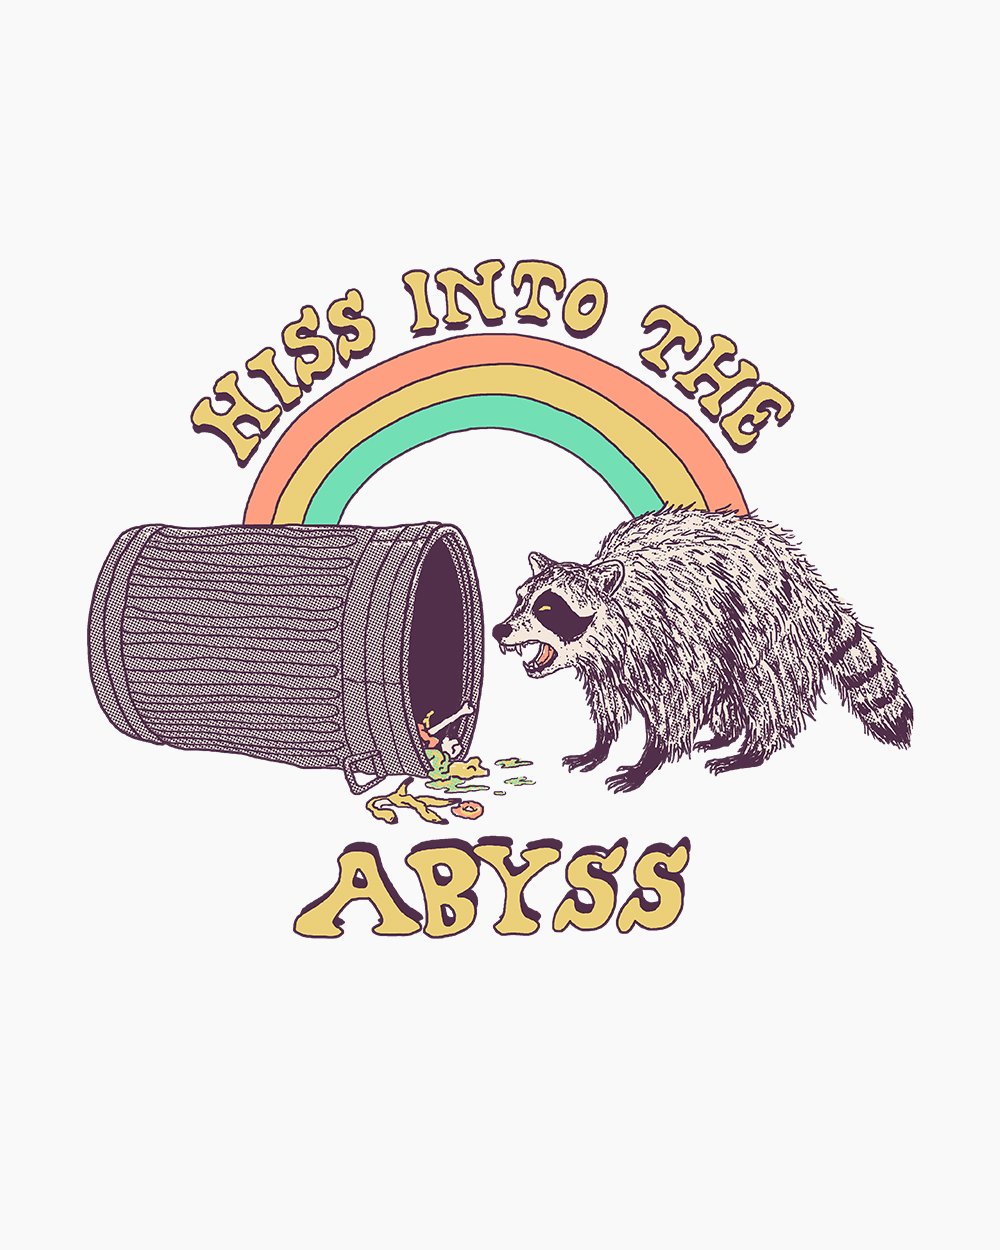 Hiss into the Abyss T-Shirt Australia Online #colour_white